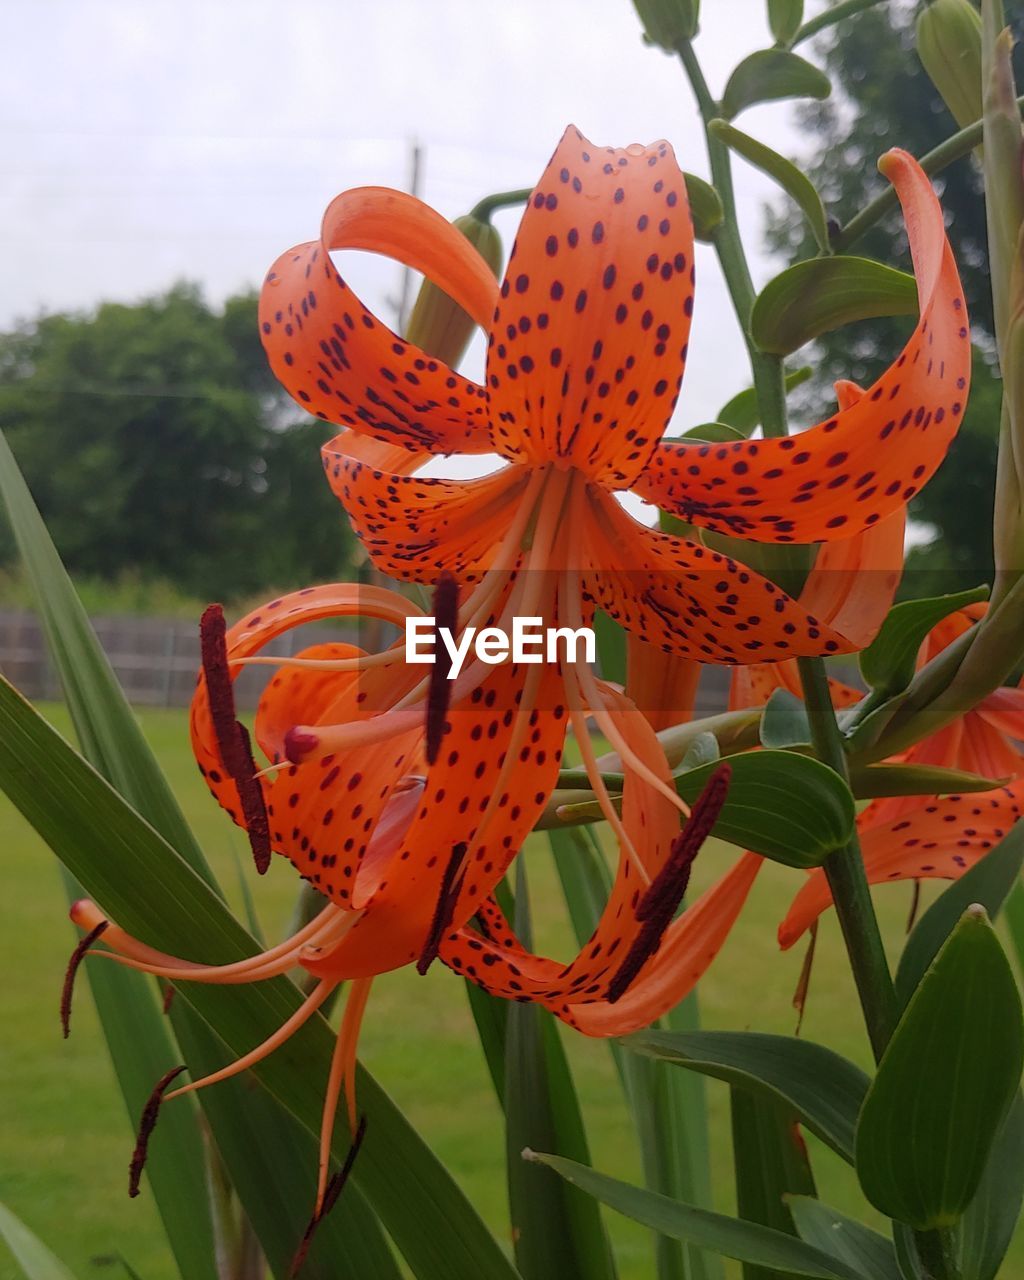 CLOSE-UP OF ORANGE LILY PLANT IN GARDEN